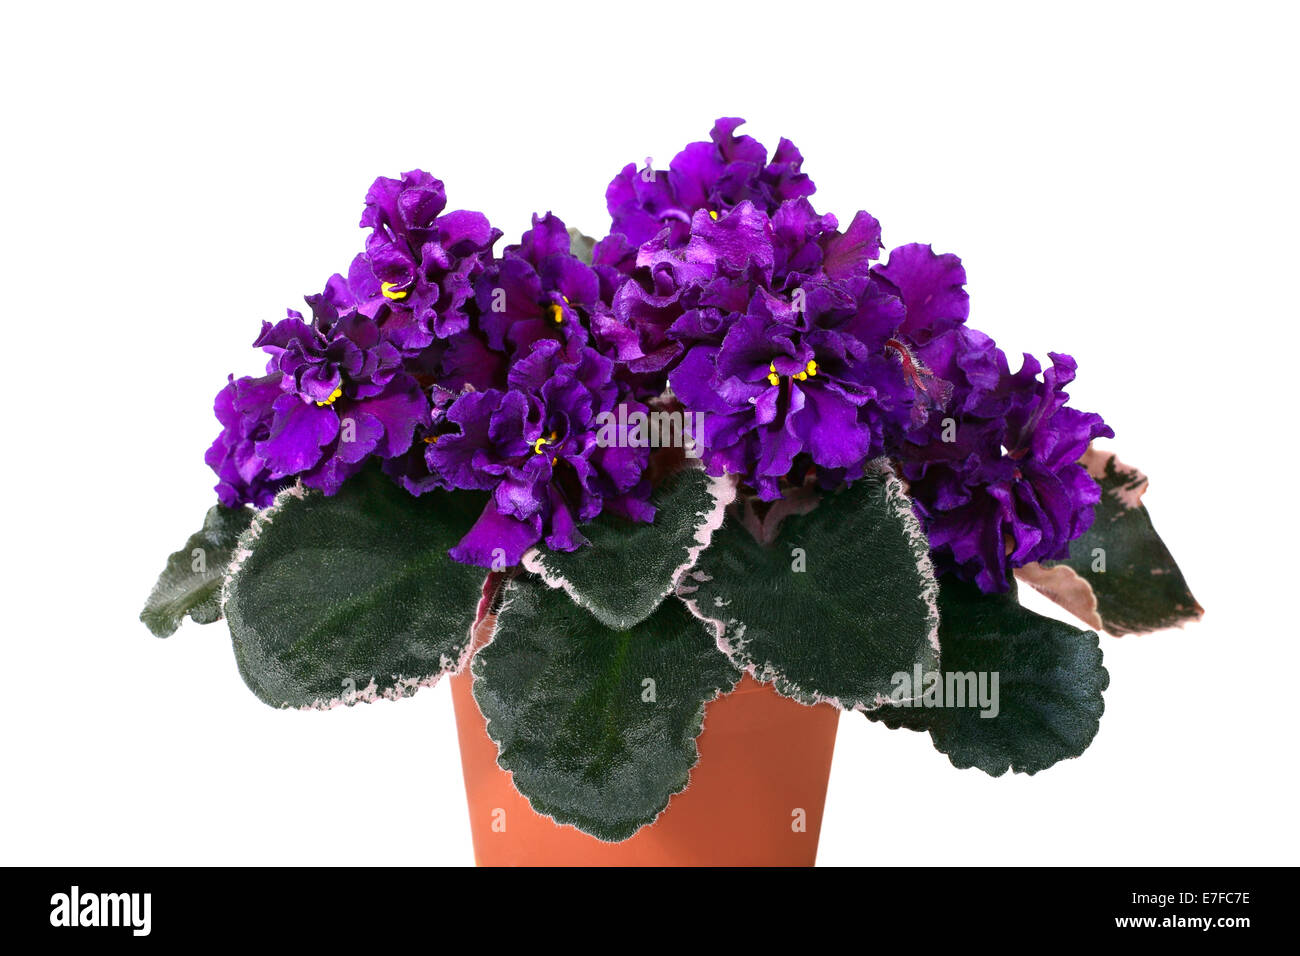 Violet Saintpaulia Midnight Magic flowers in ceramic pot isolated on white background Stock Photo